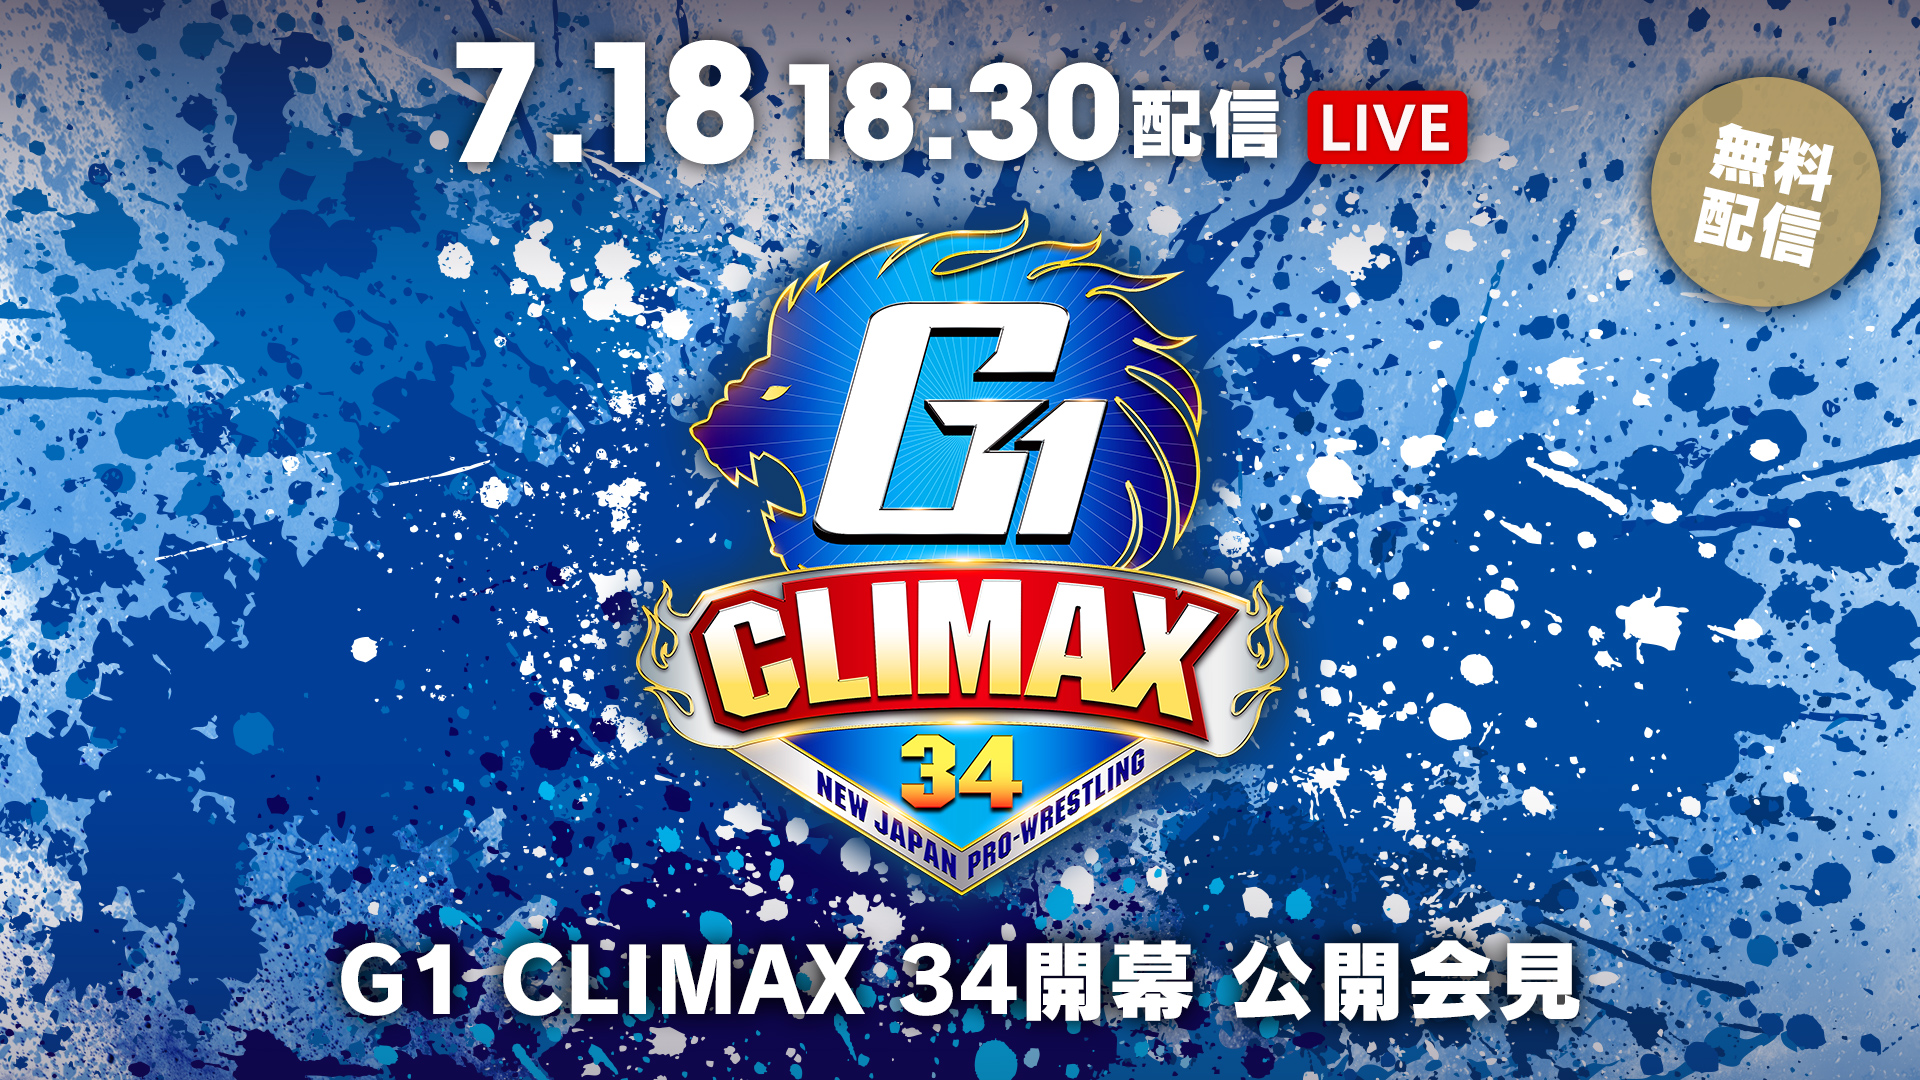 G1 Climax 34: 5 Things to Look Out for from the NJPW Weekend Event